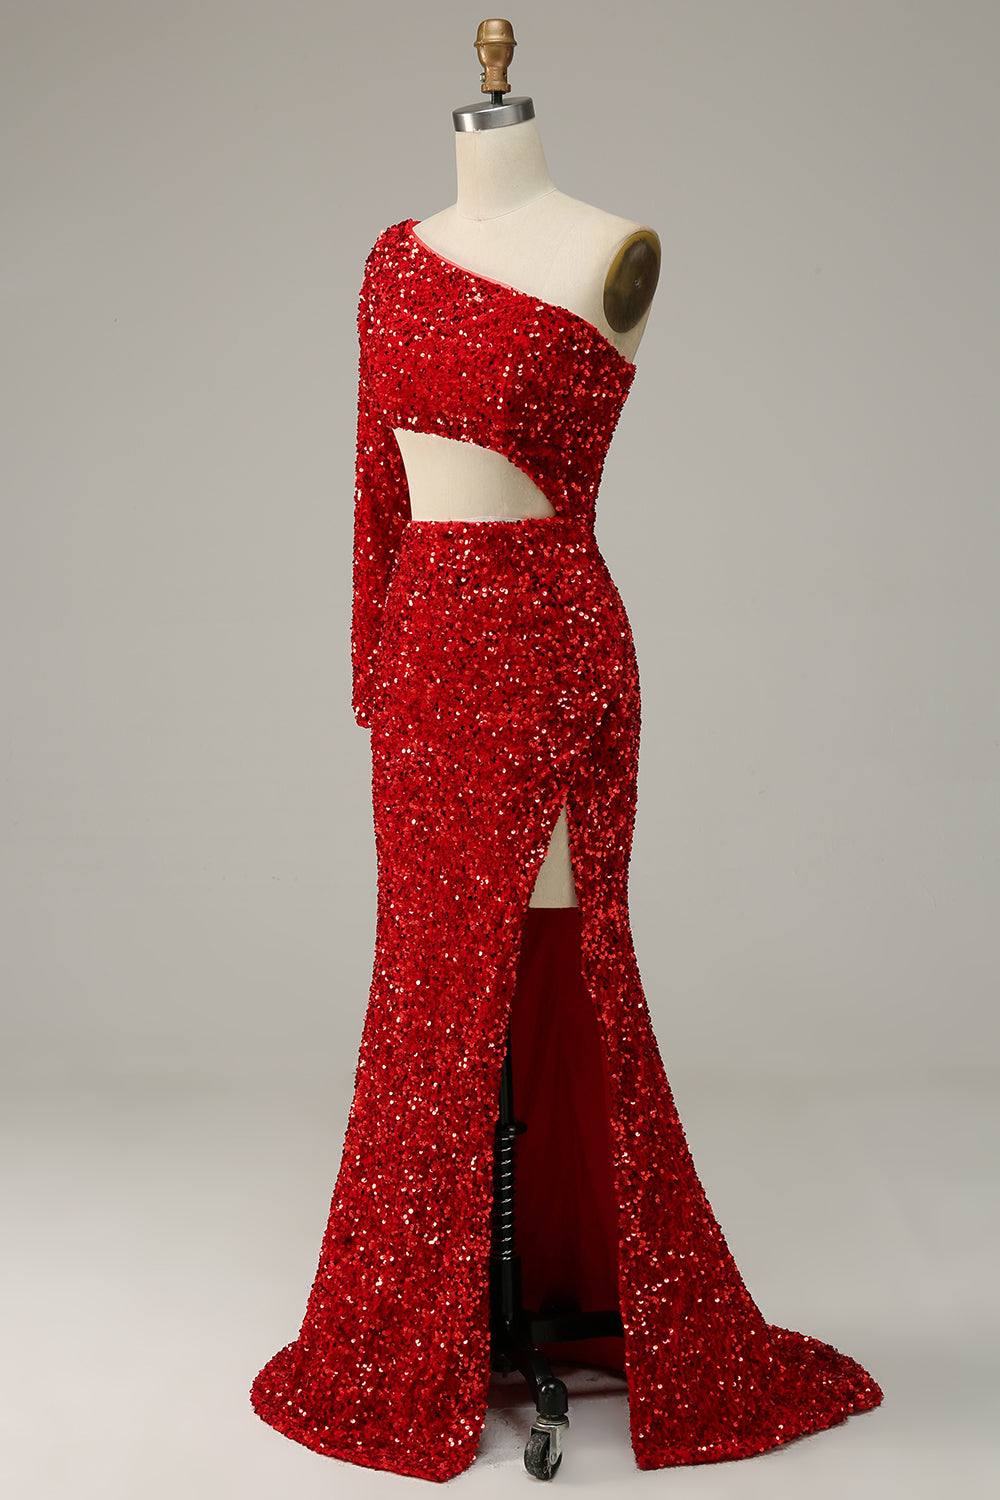 Prom Dress Short, Mermaid One Shoulder Red Sequins Cut Out Prom Dress with Slit Front